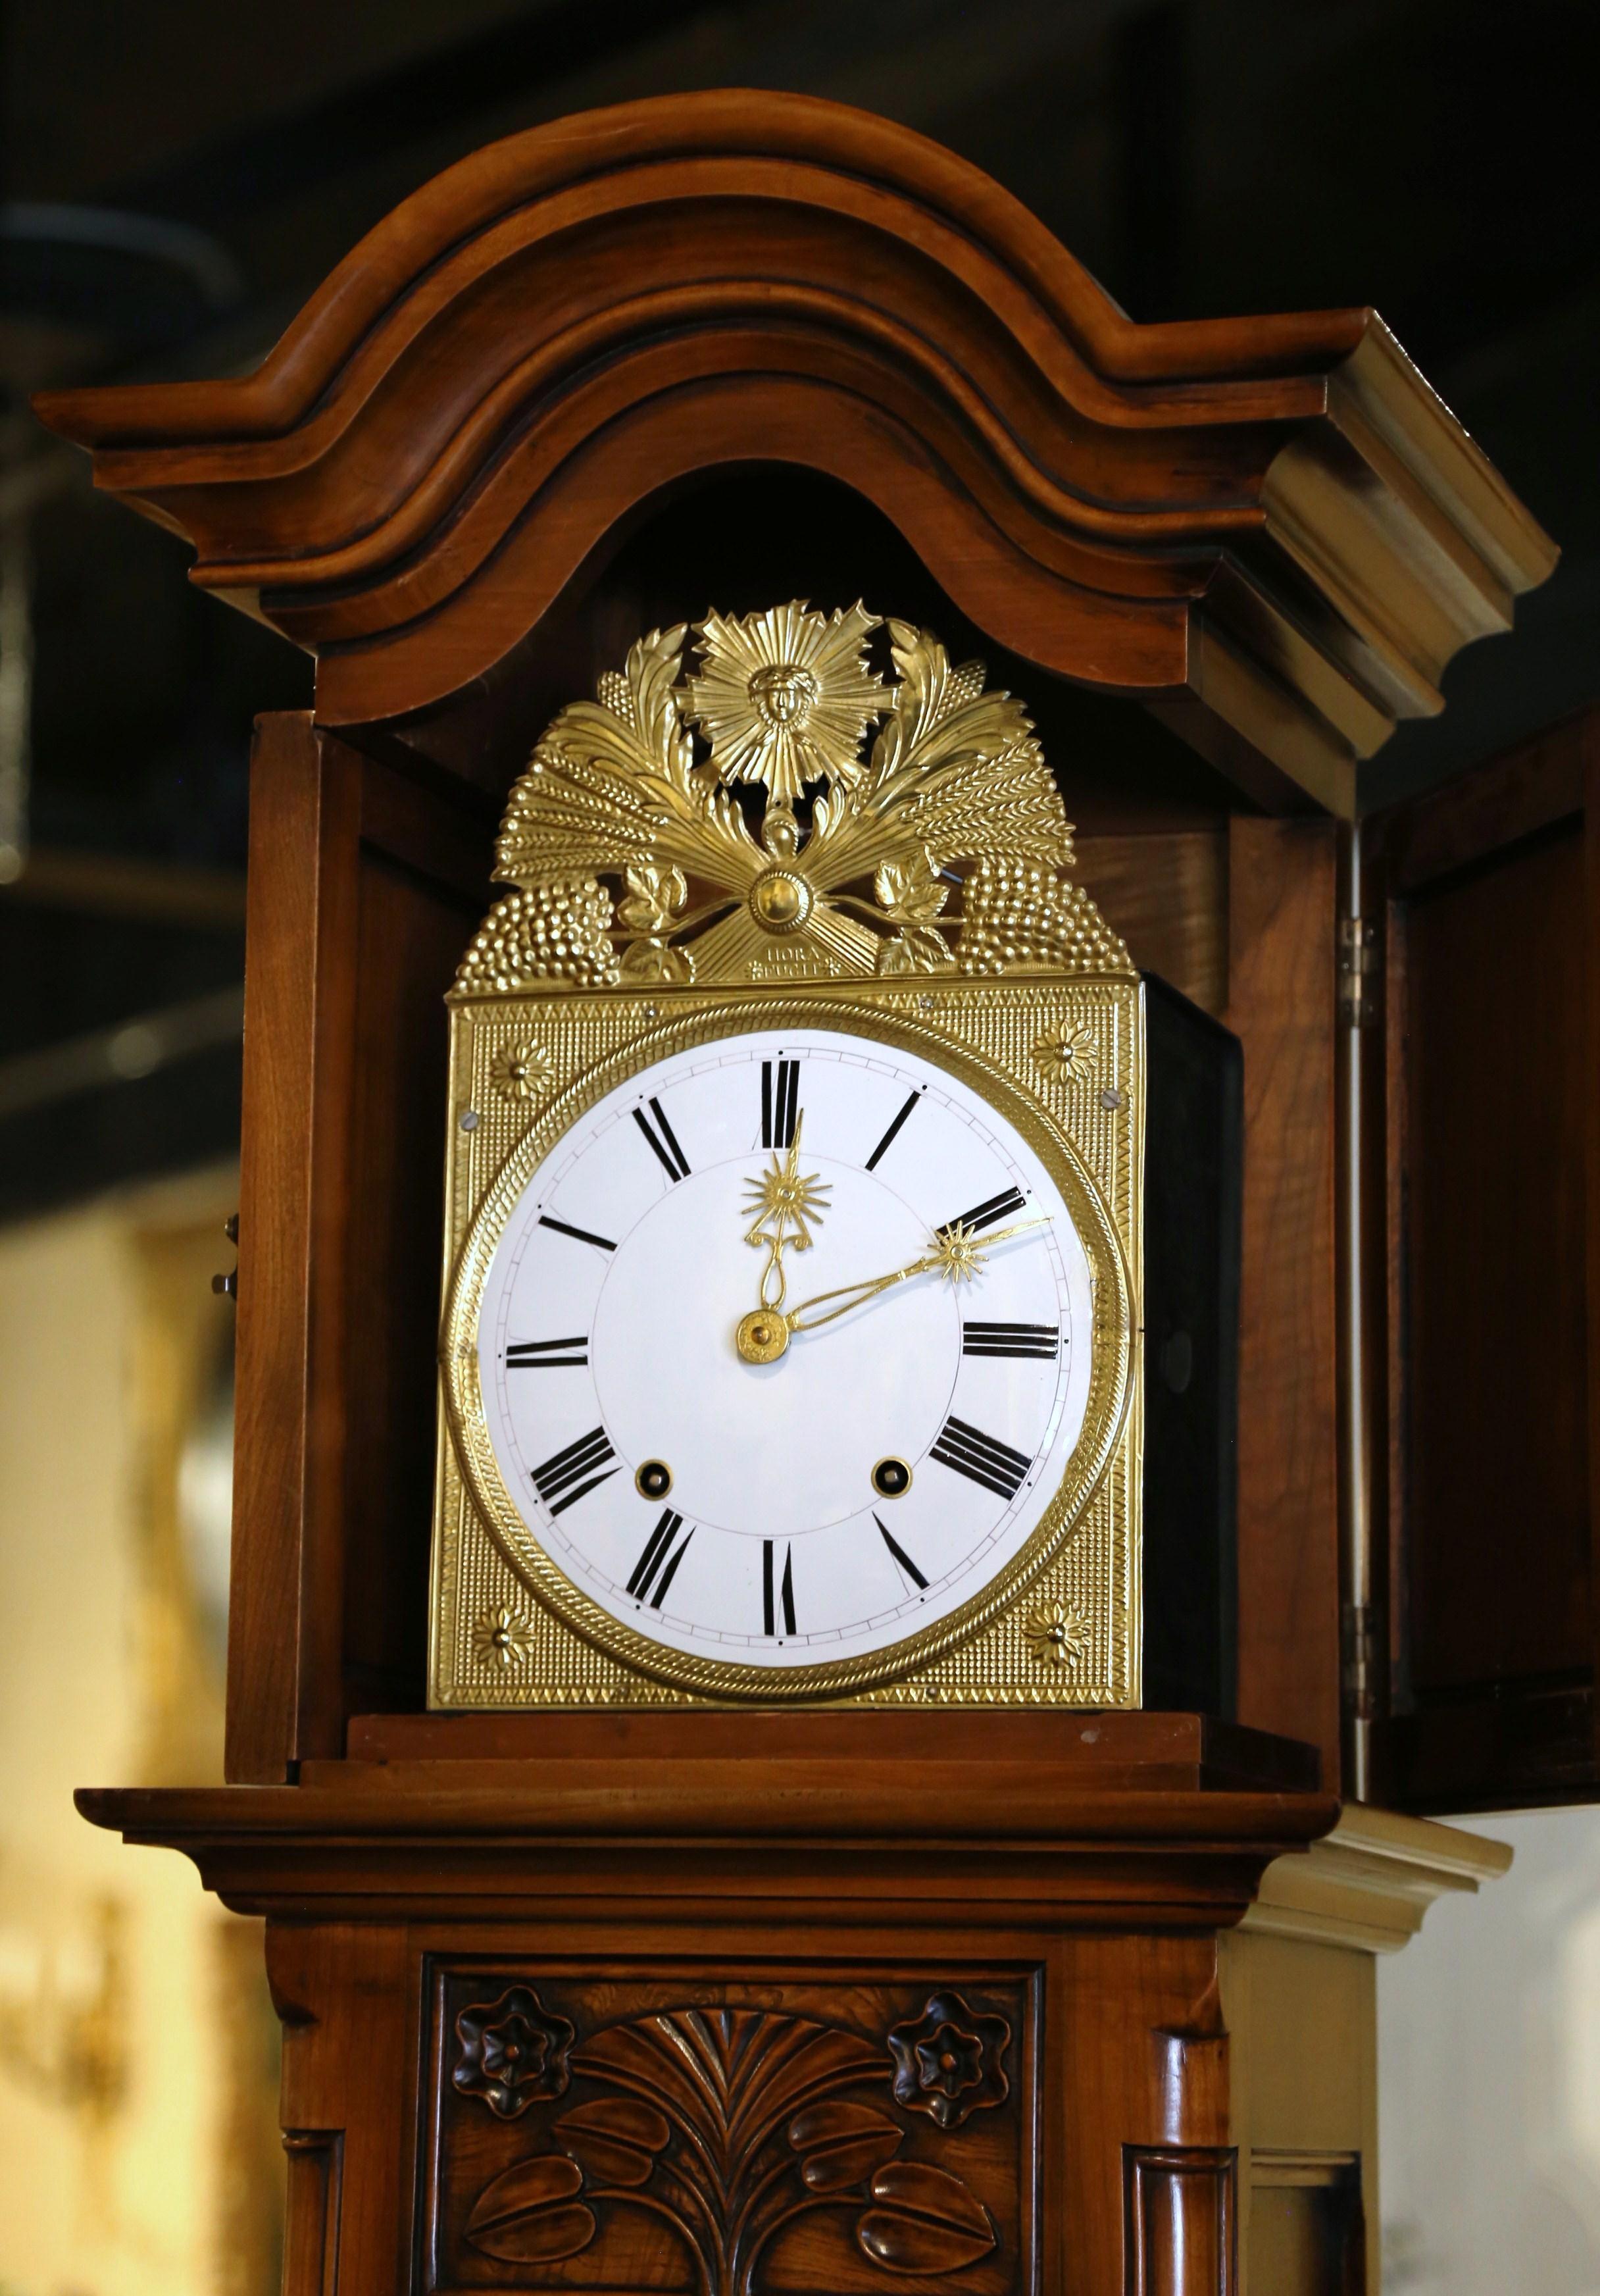 20th Century French Louis XV Carved Burl Wood Grandfather Clock from Lyon Region For Sale 4